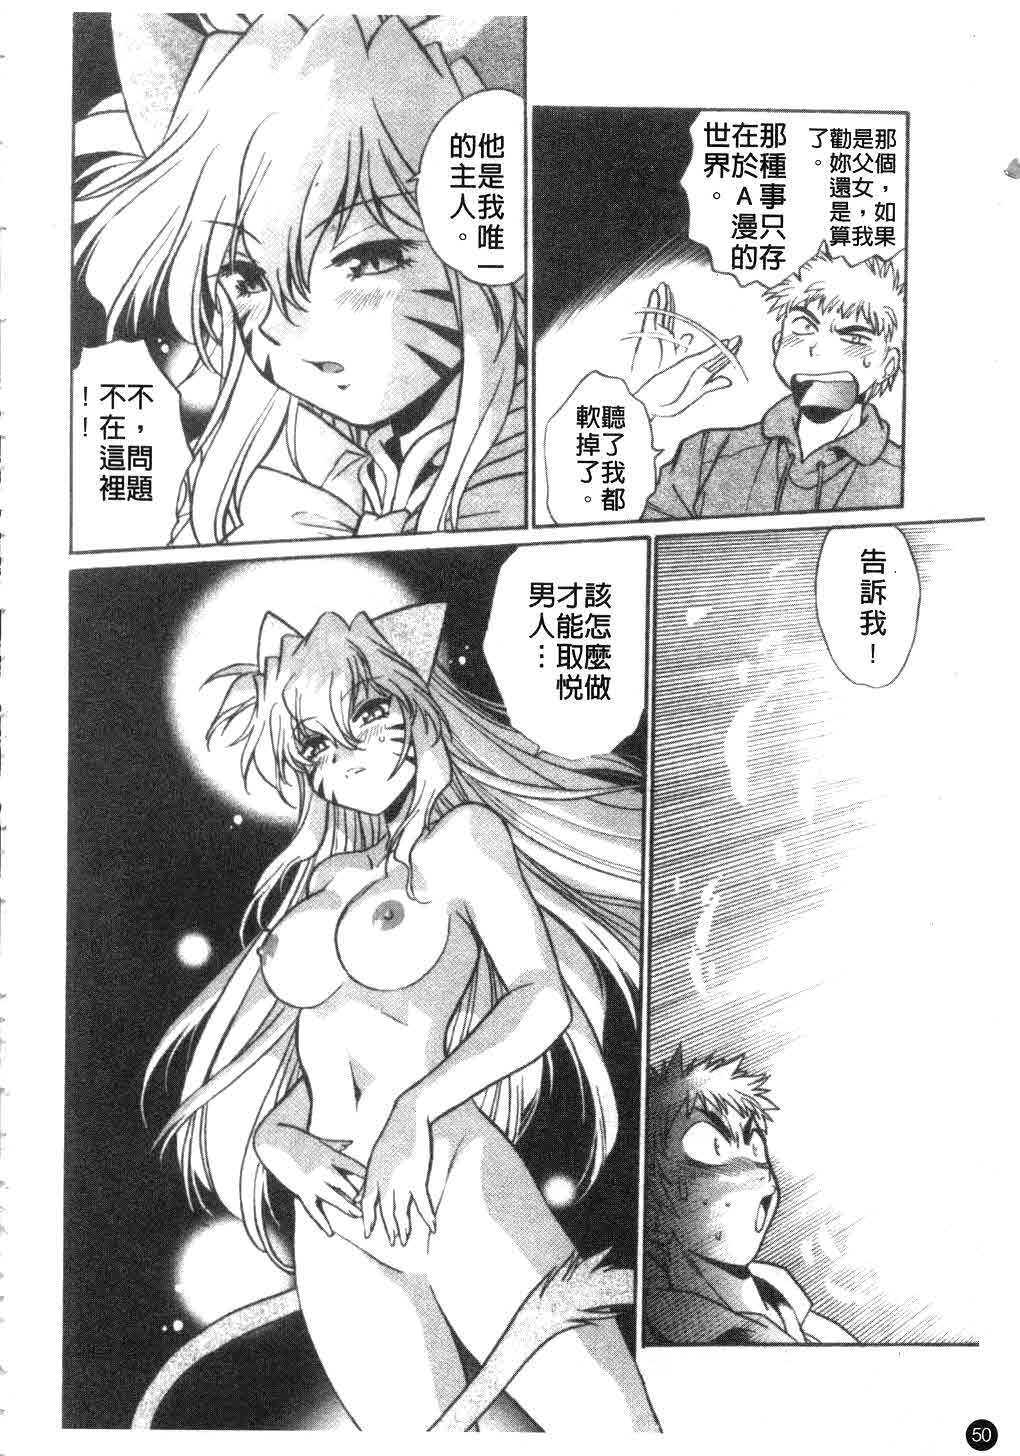 [Manabe Jouji] Tail Chaser 3 | 貓女迷情 3 [Chinese] page 51 full